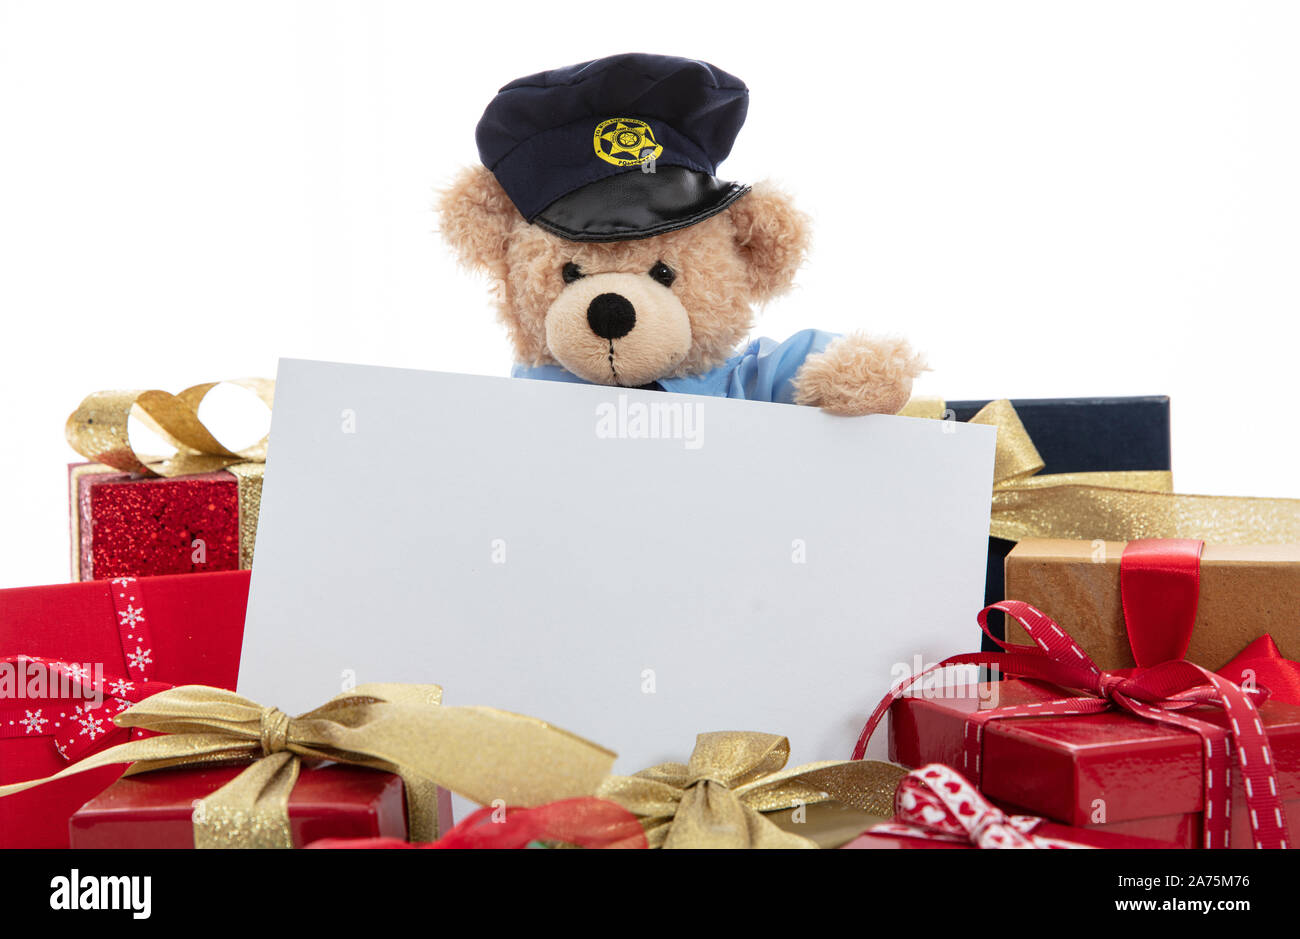 Police and christmas concept. Cute teddy bear in police officer uniform and xmas gift boxes isolated against white background, copy space Stock Photo